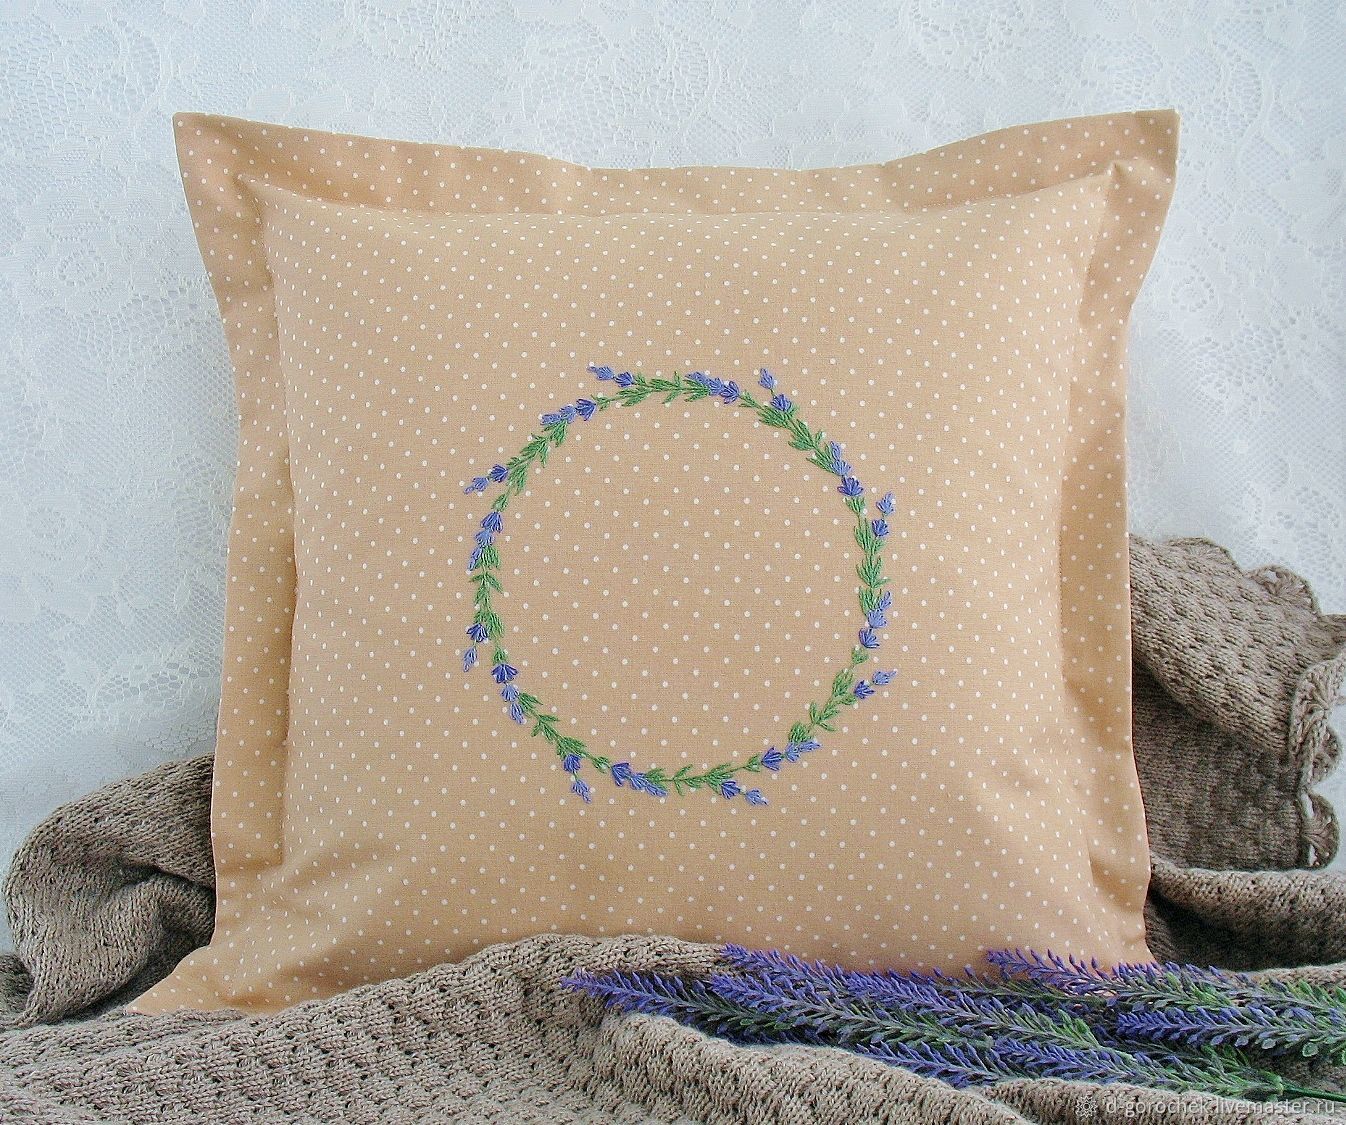 Embroidered Handmade Pillow